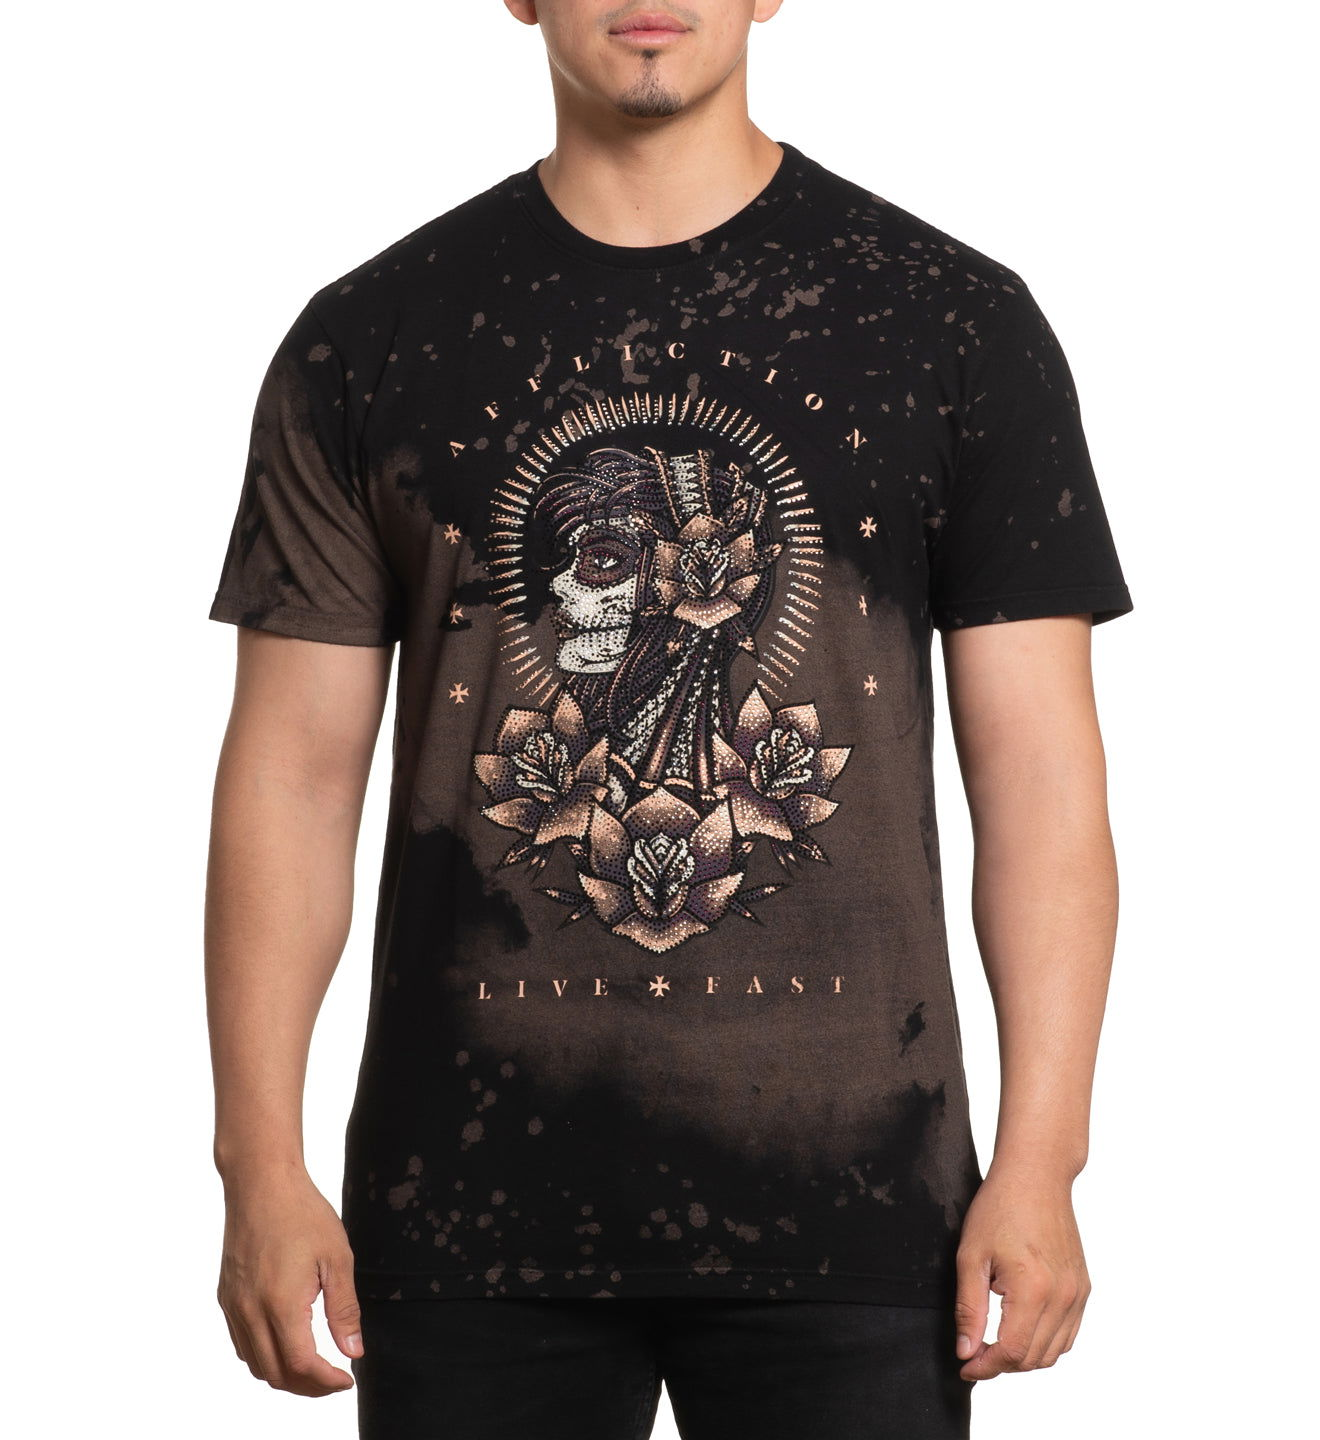 Confessional - Affliction Clothing